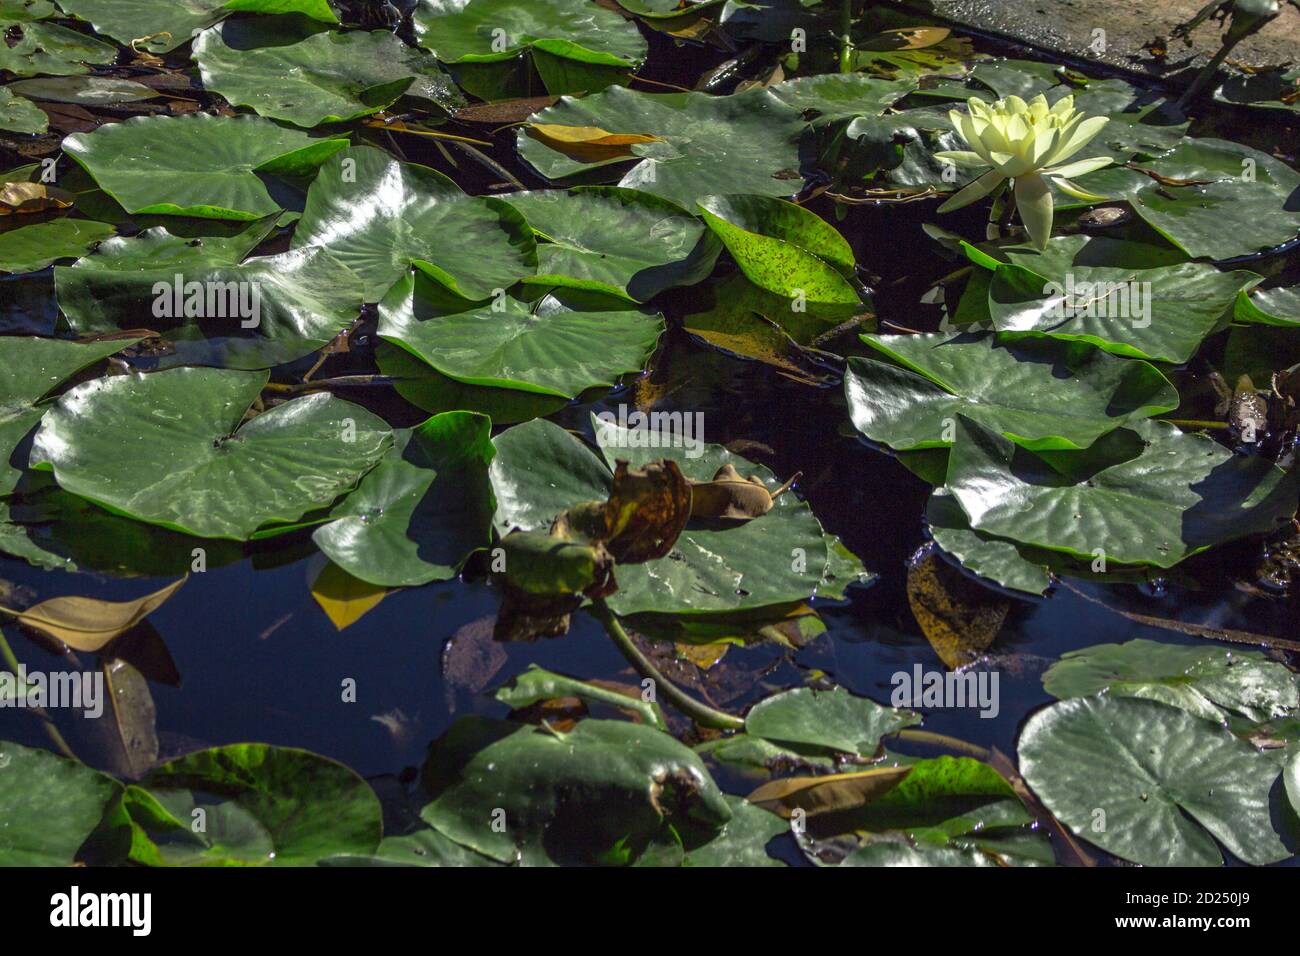 A white lotus flower blossomed on an expanse of leaves over the water Stock Photo